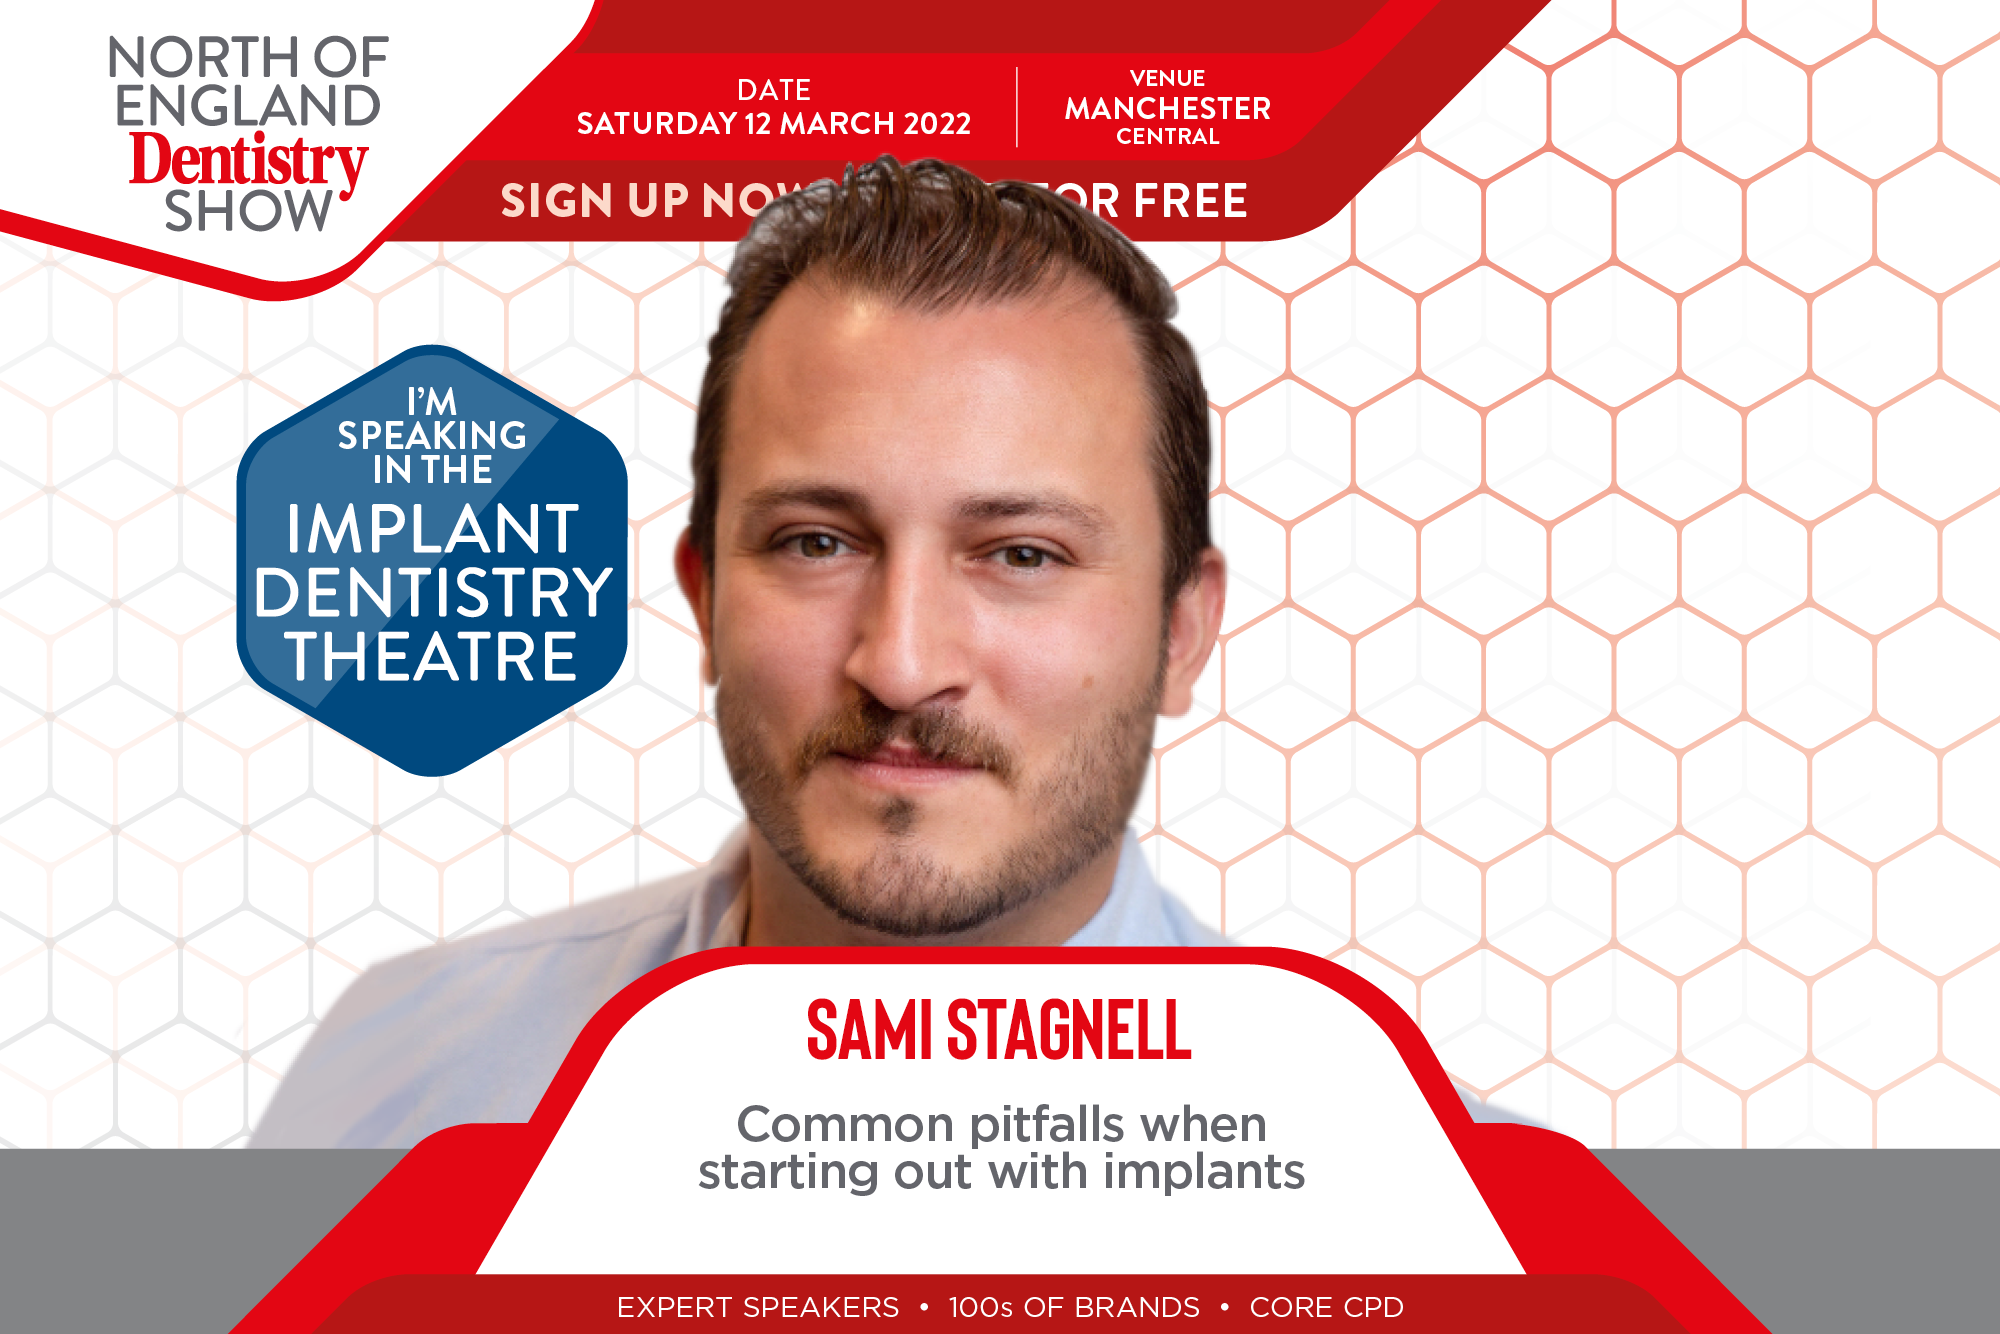 North of England Dentistry Show – Sami Stagnell 